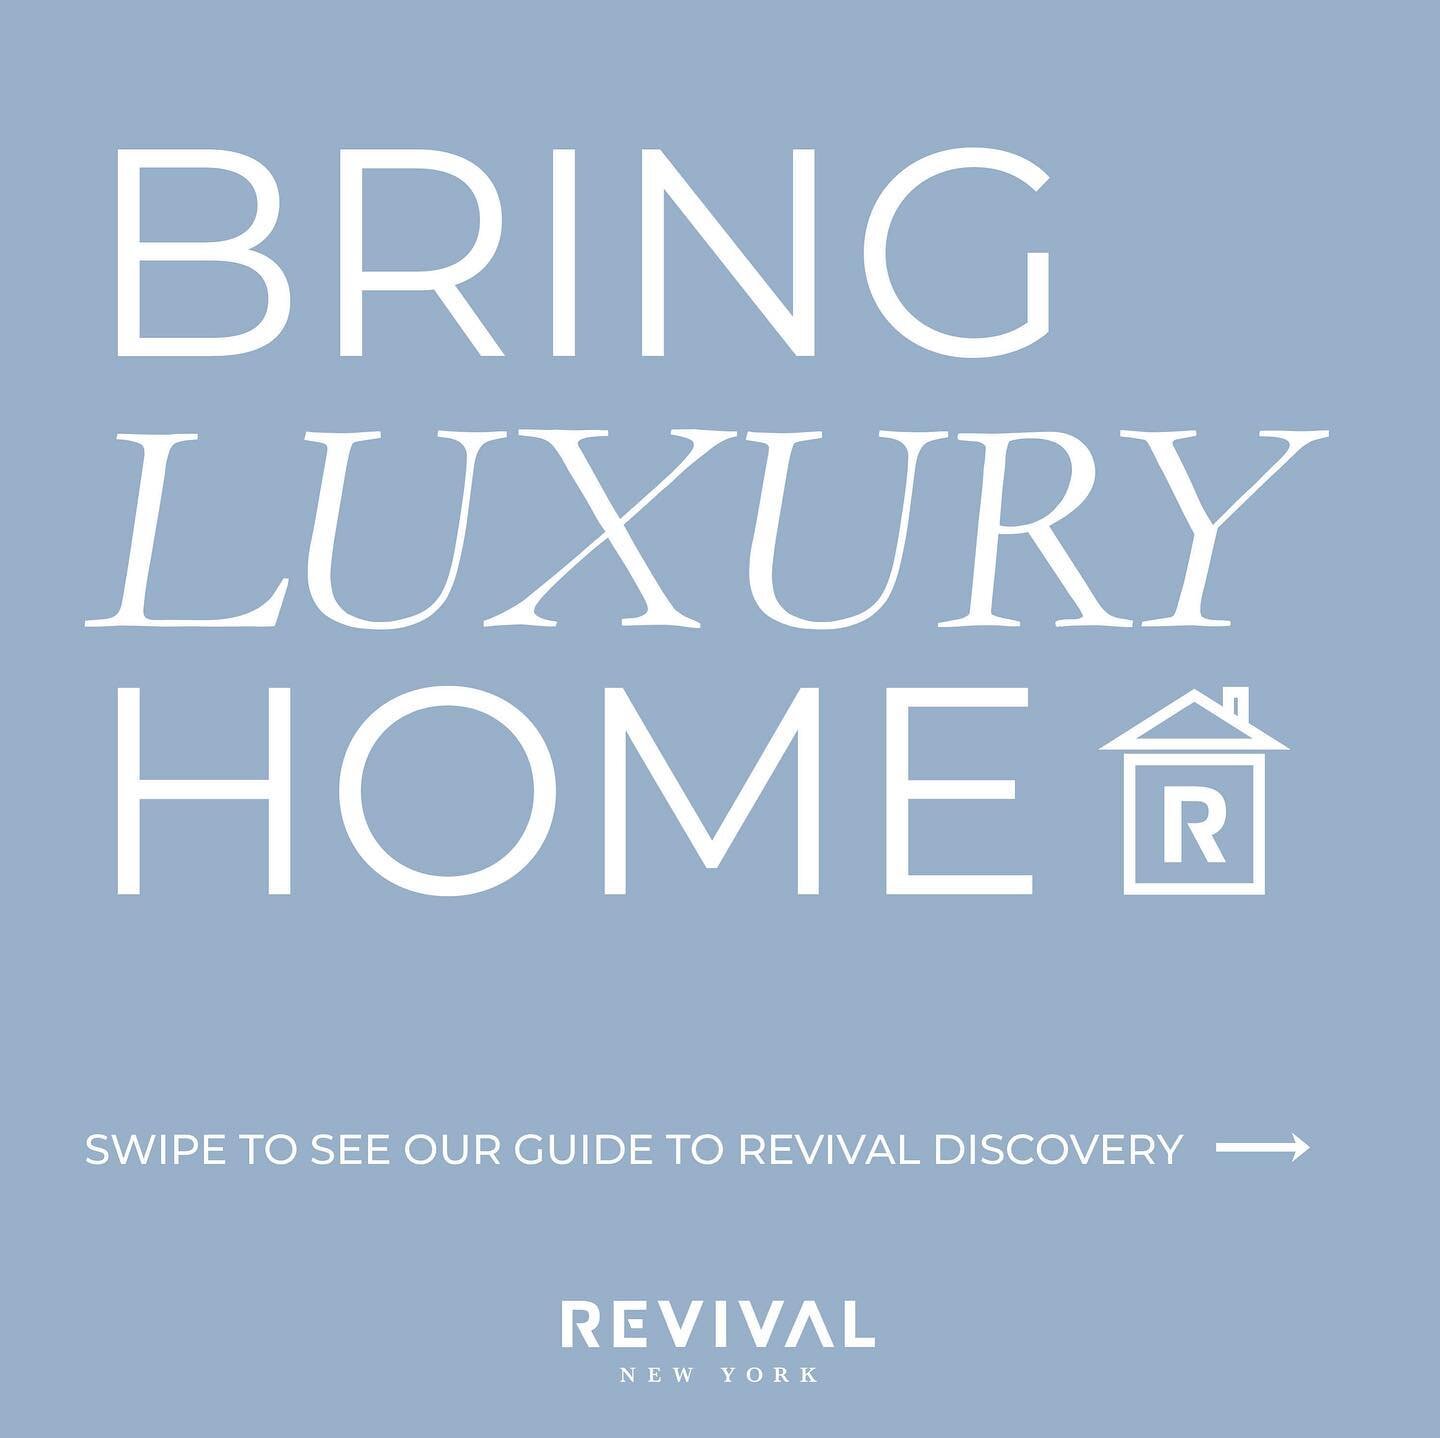 Check out our guide to the process of Revival discovery to assist with you with being your best self in the best of health 🤍 #revivalnewyork 

#sheetseverywhere #luxury #lifestyle #luxuryliving #cozy #linen #brand